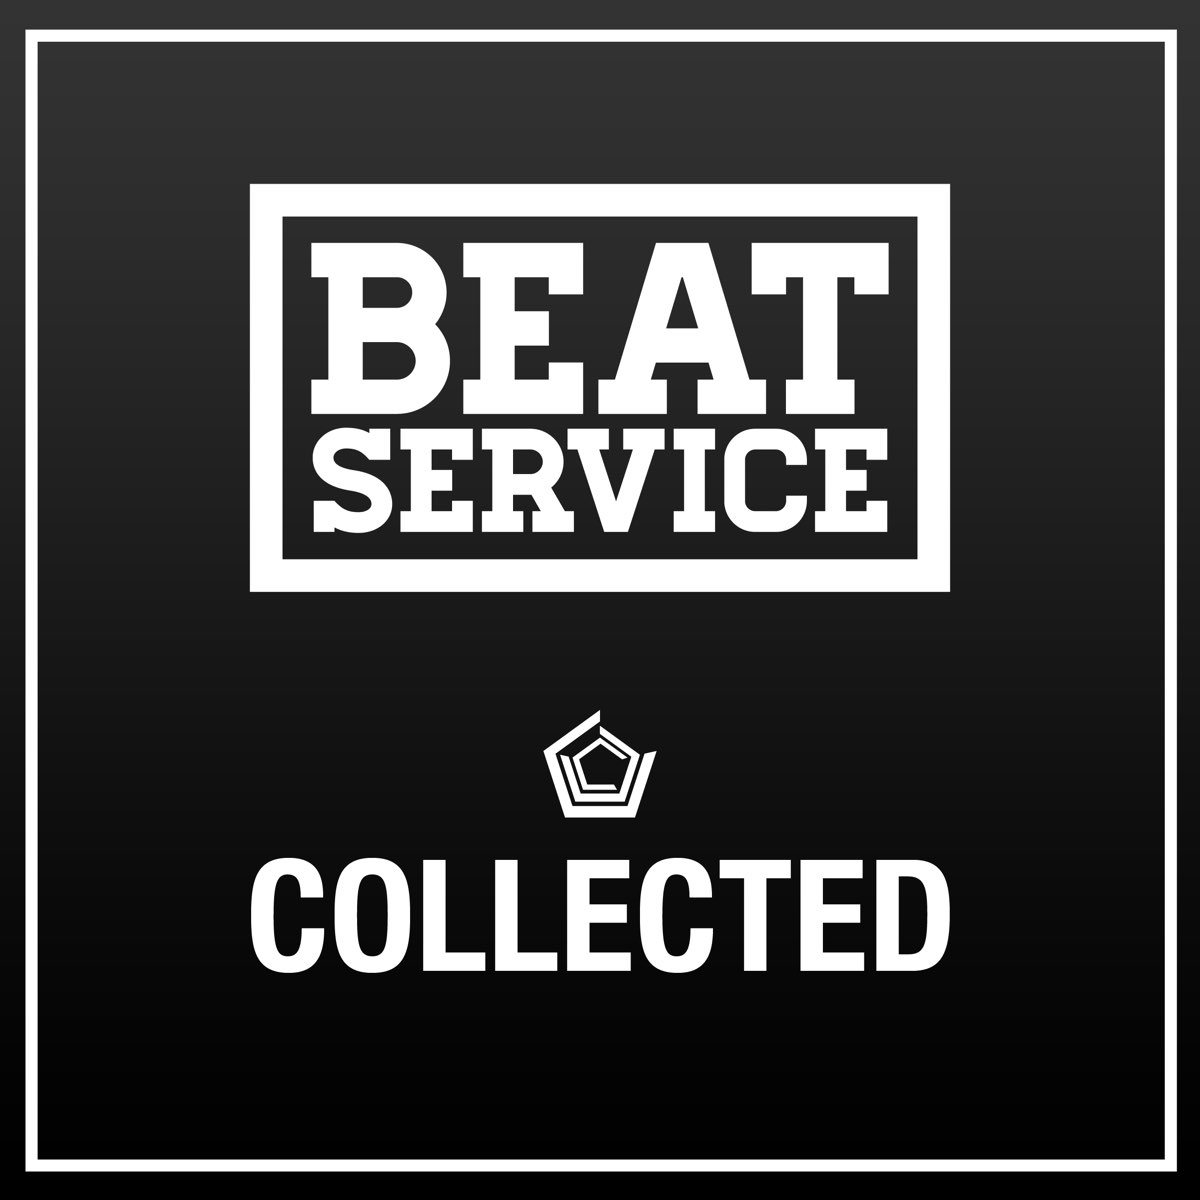 Beat service. Beat service - but i did - Extended. Collected. Beat Store надпись. Collection service.